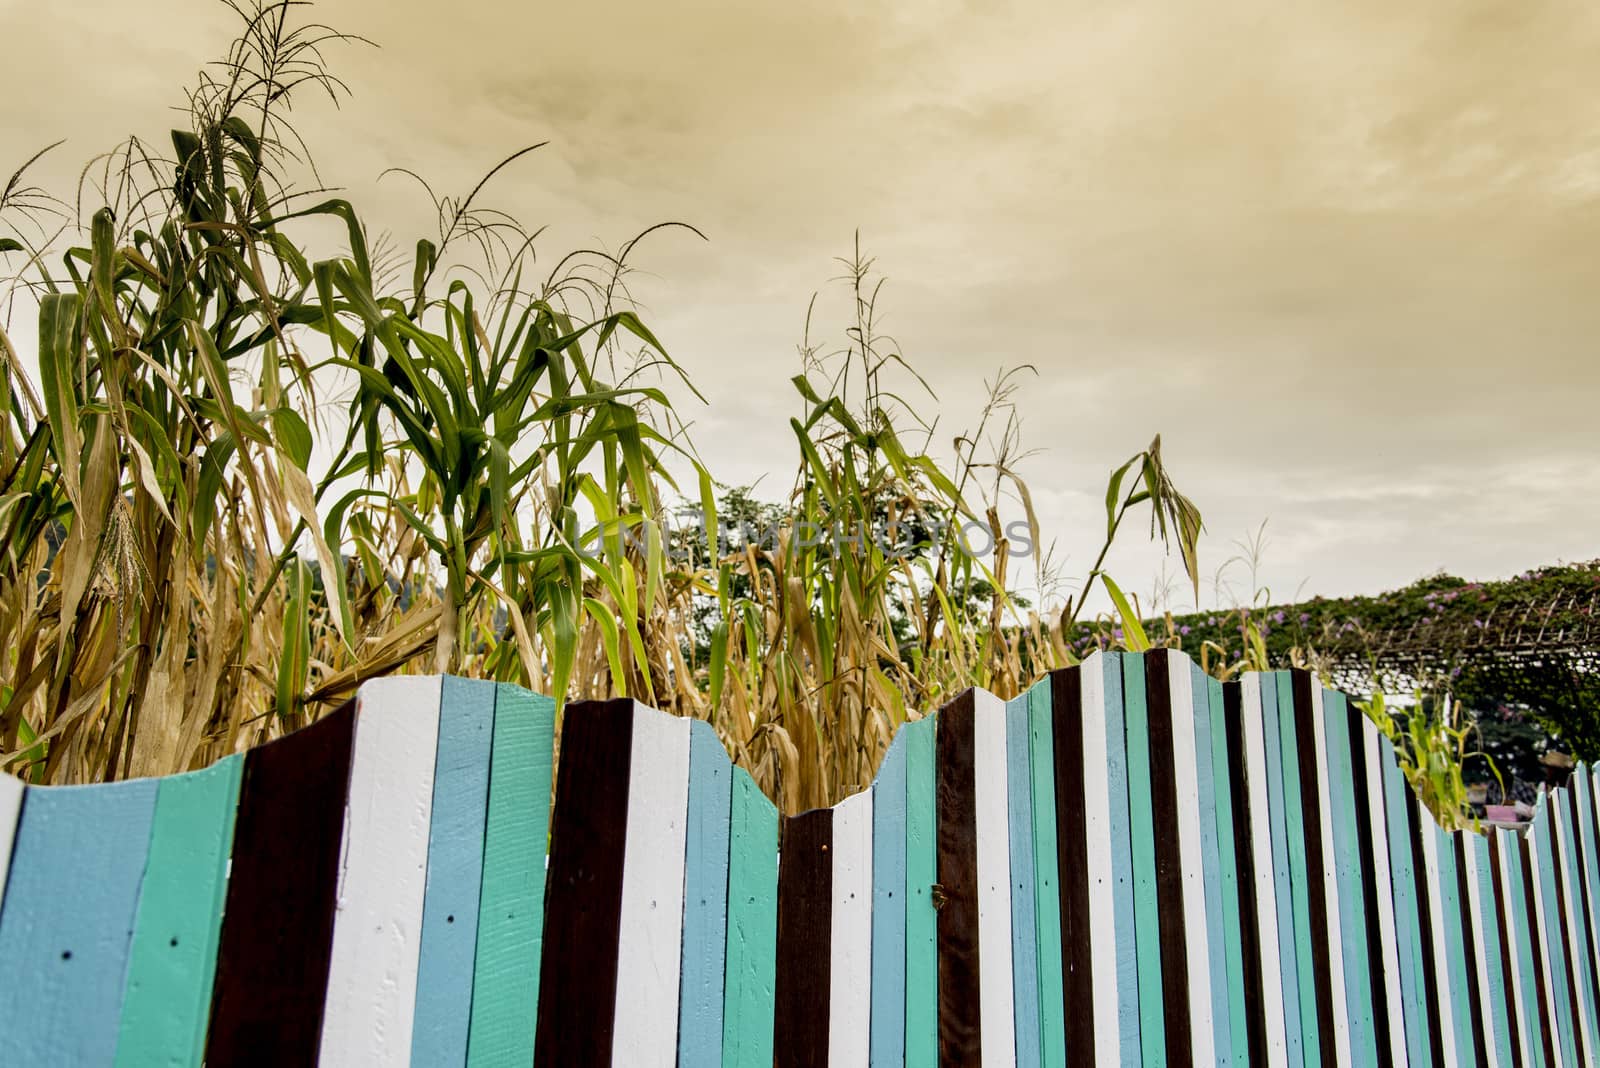 Corn field with colorful wooden fence2